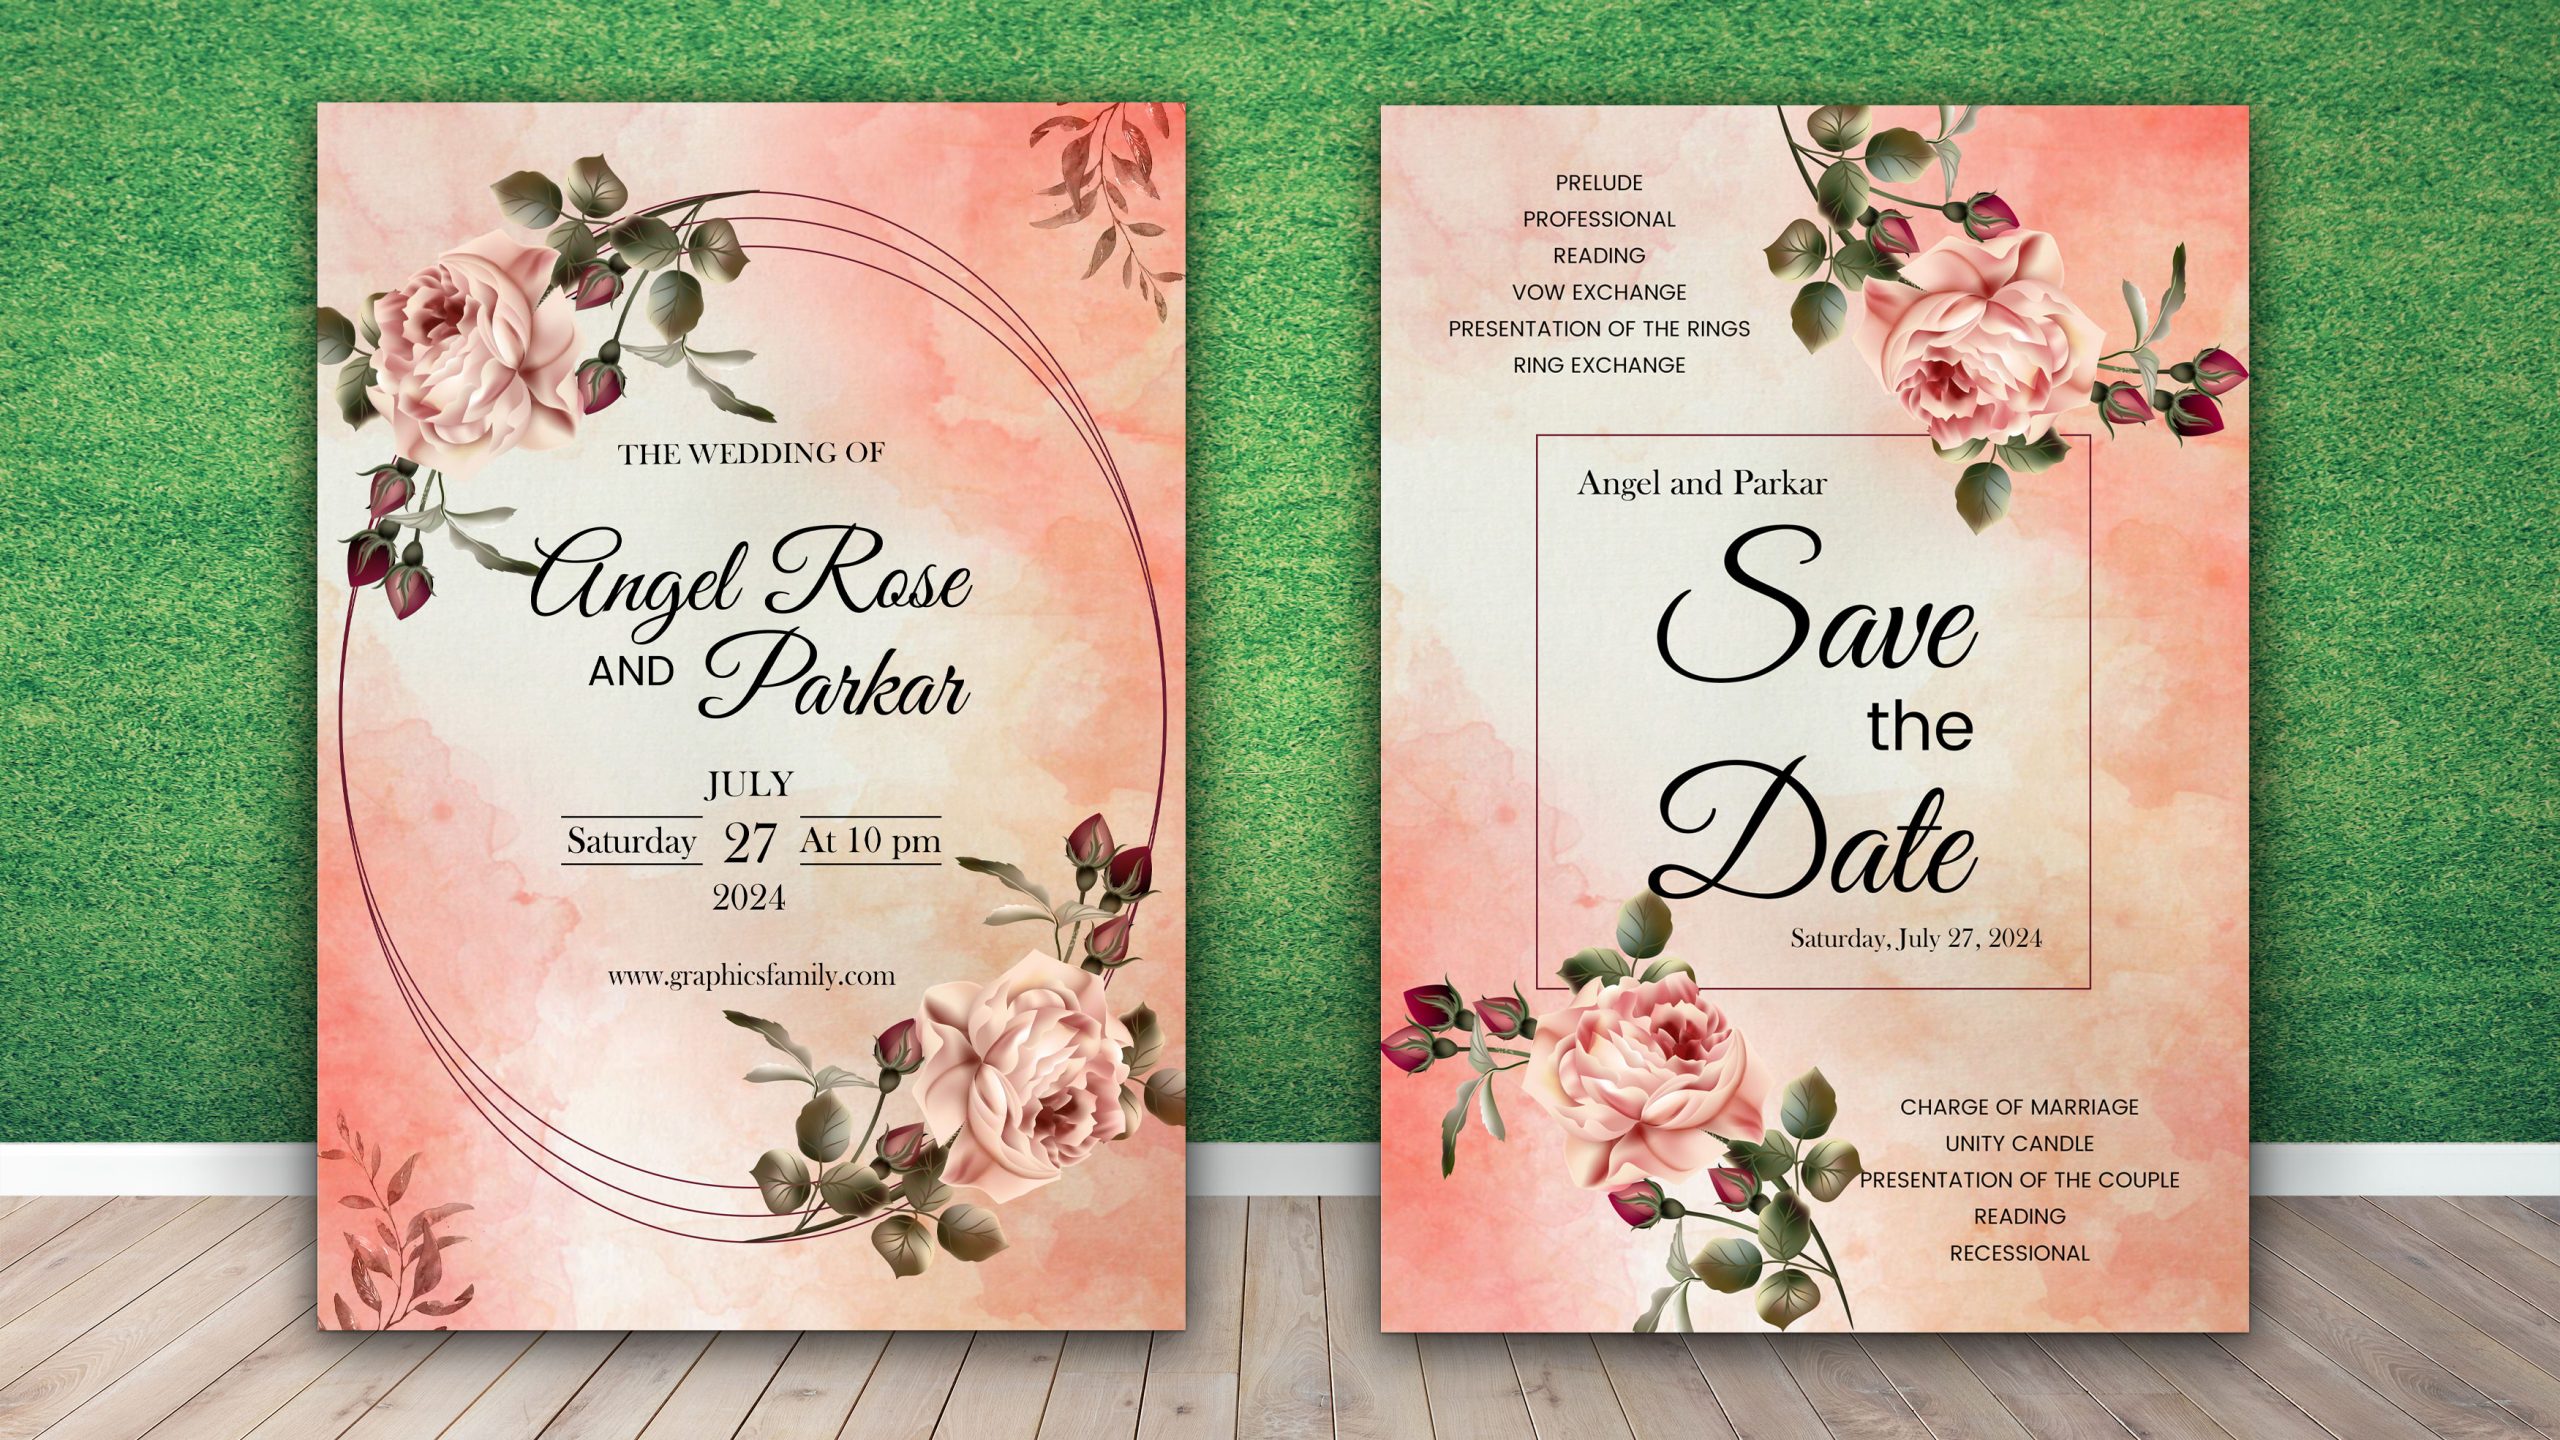 Free Wedding Card Design – GraphicsFamily